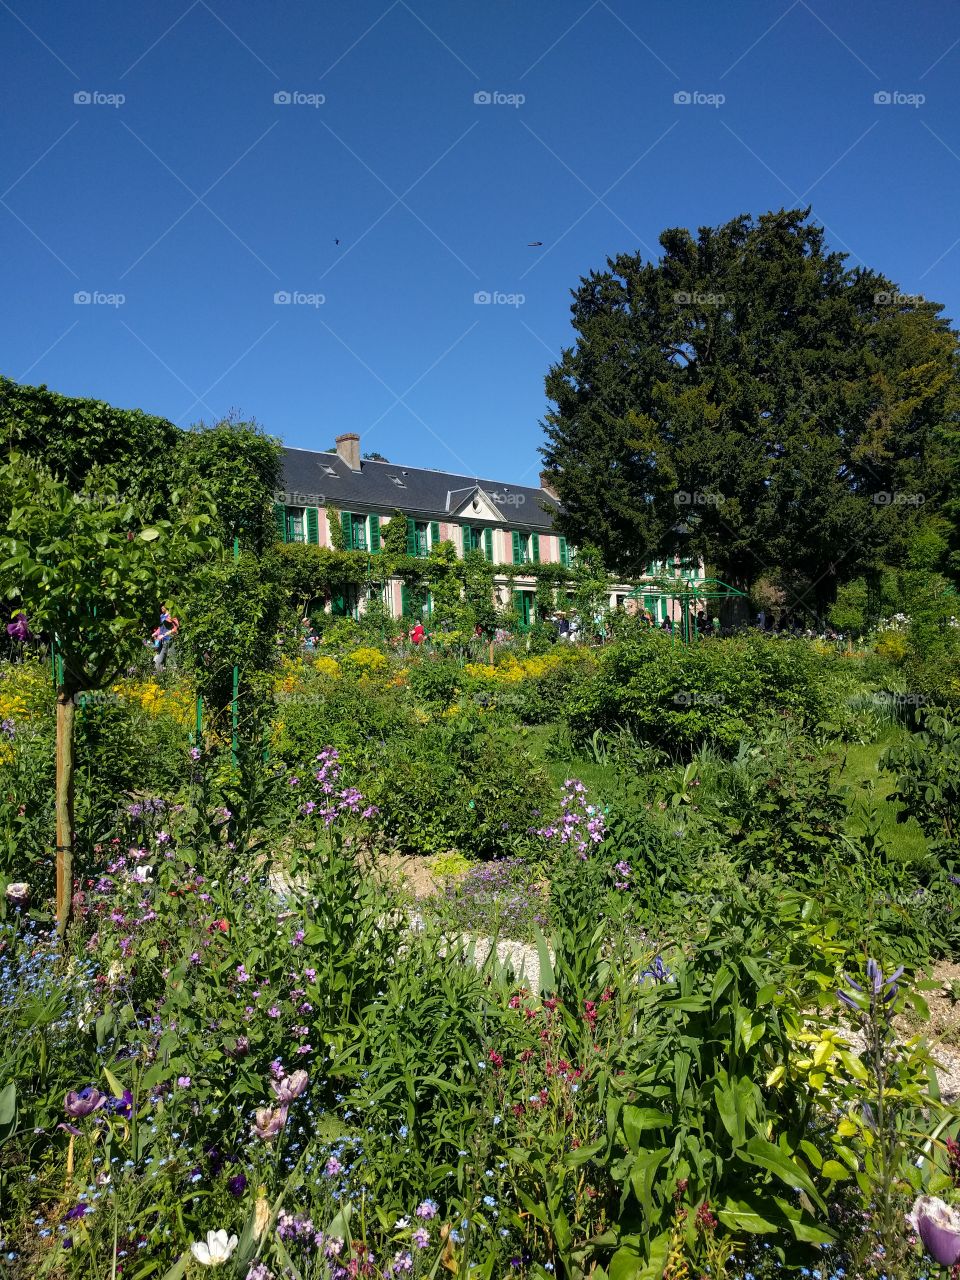 Monet's house and garden in Giverny, France